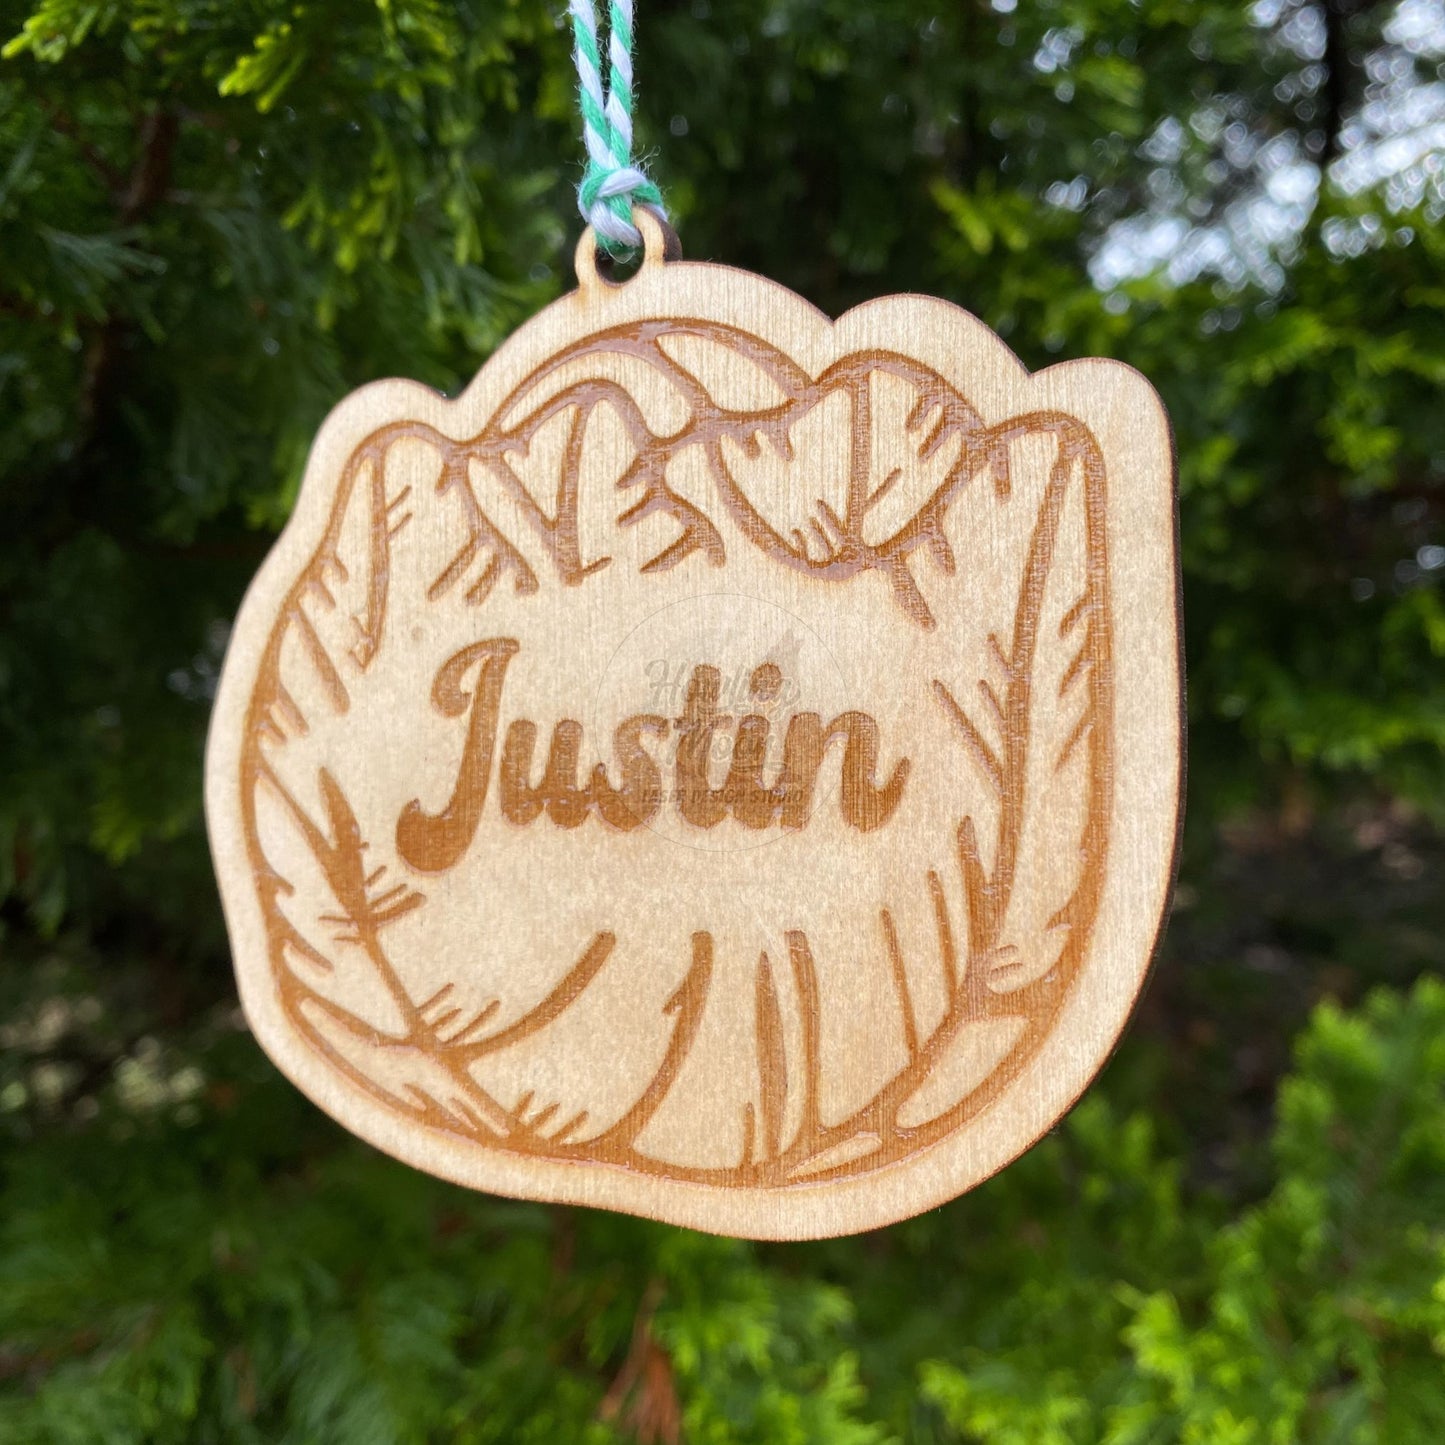 Close up of Personalized cabbage ornament hanging from a tree with green & white twine. Made by Howling Moon Laser Design in Virginia, USA